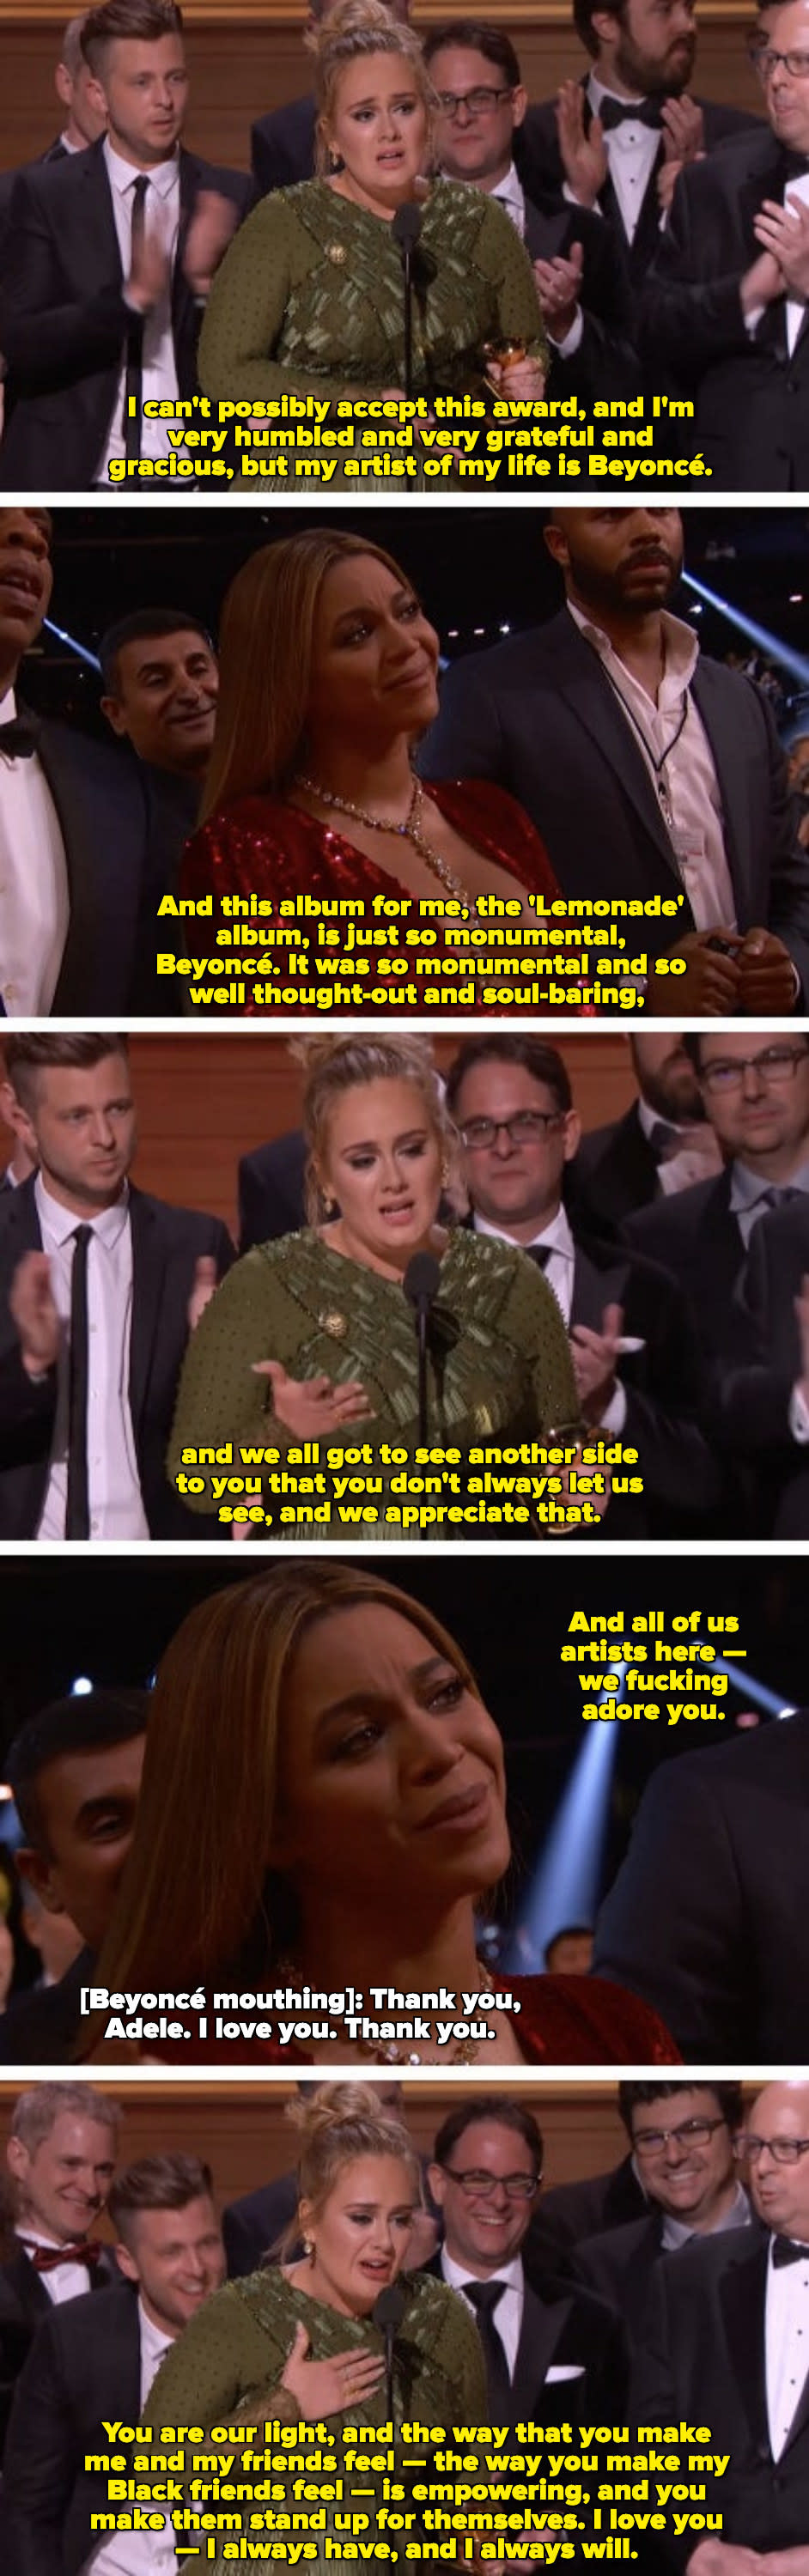 Adele praising Beyoncé for the "Lemonade" album, saying it was monumental and "So well thought-out and soul-baring"